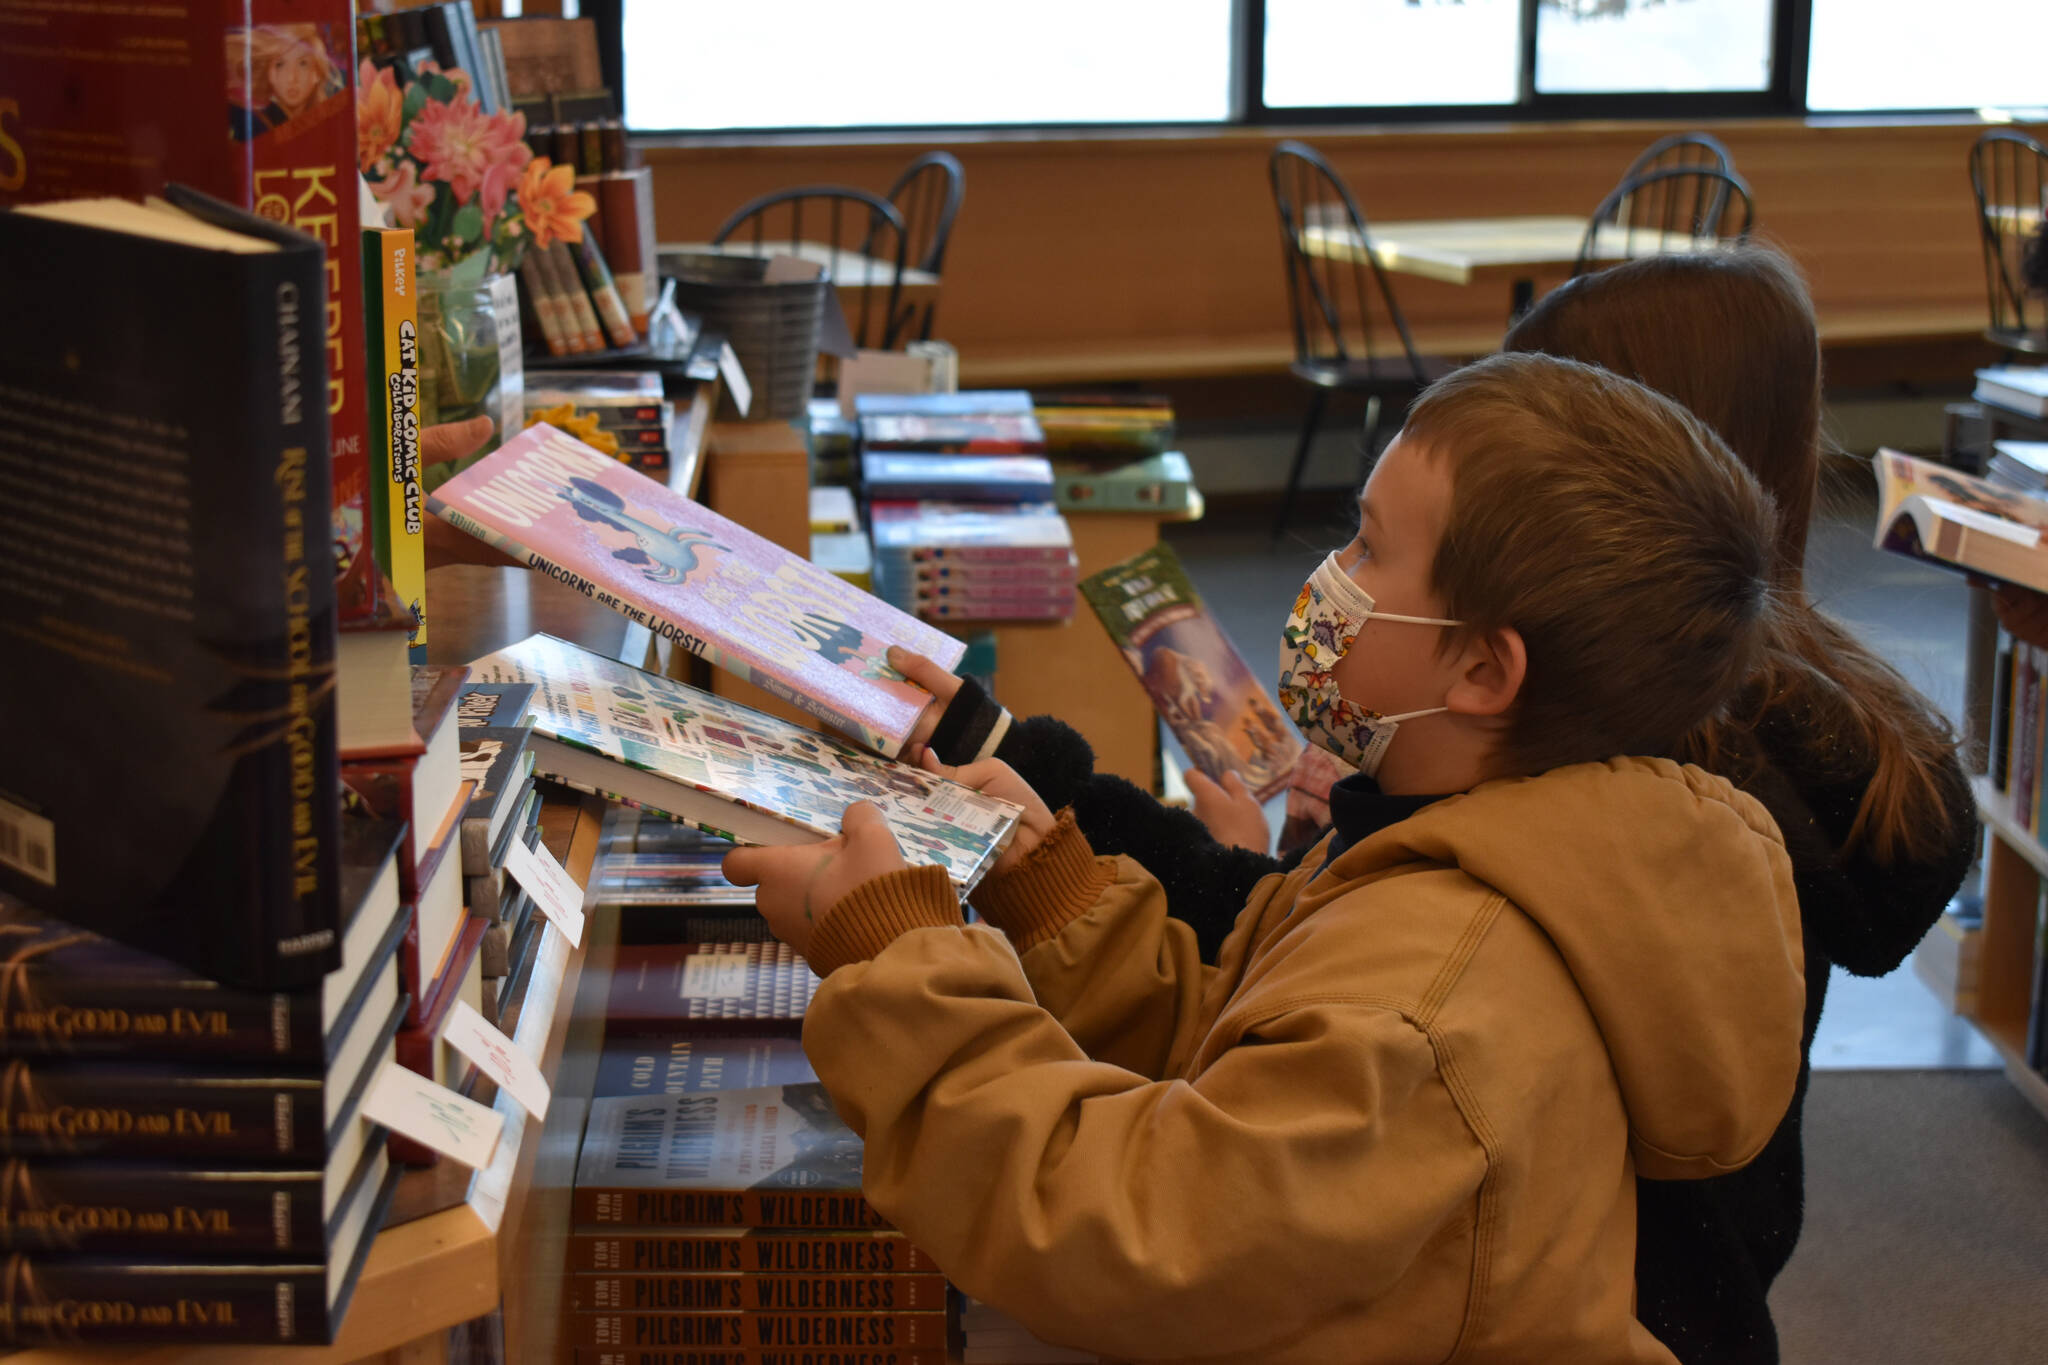 Soldotna Elementary students check out with their books on Wednesday, March 8, 2023, at River City Books in Soldotna, Alaska. (Jake Dye/Peninsula Clarion)